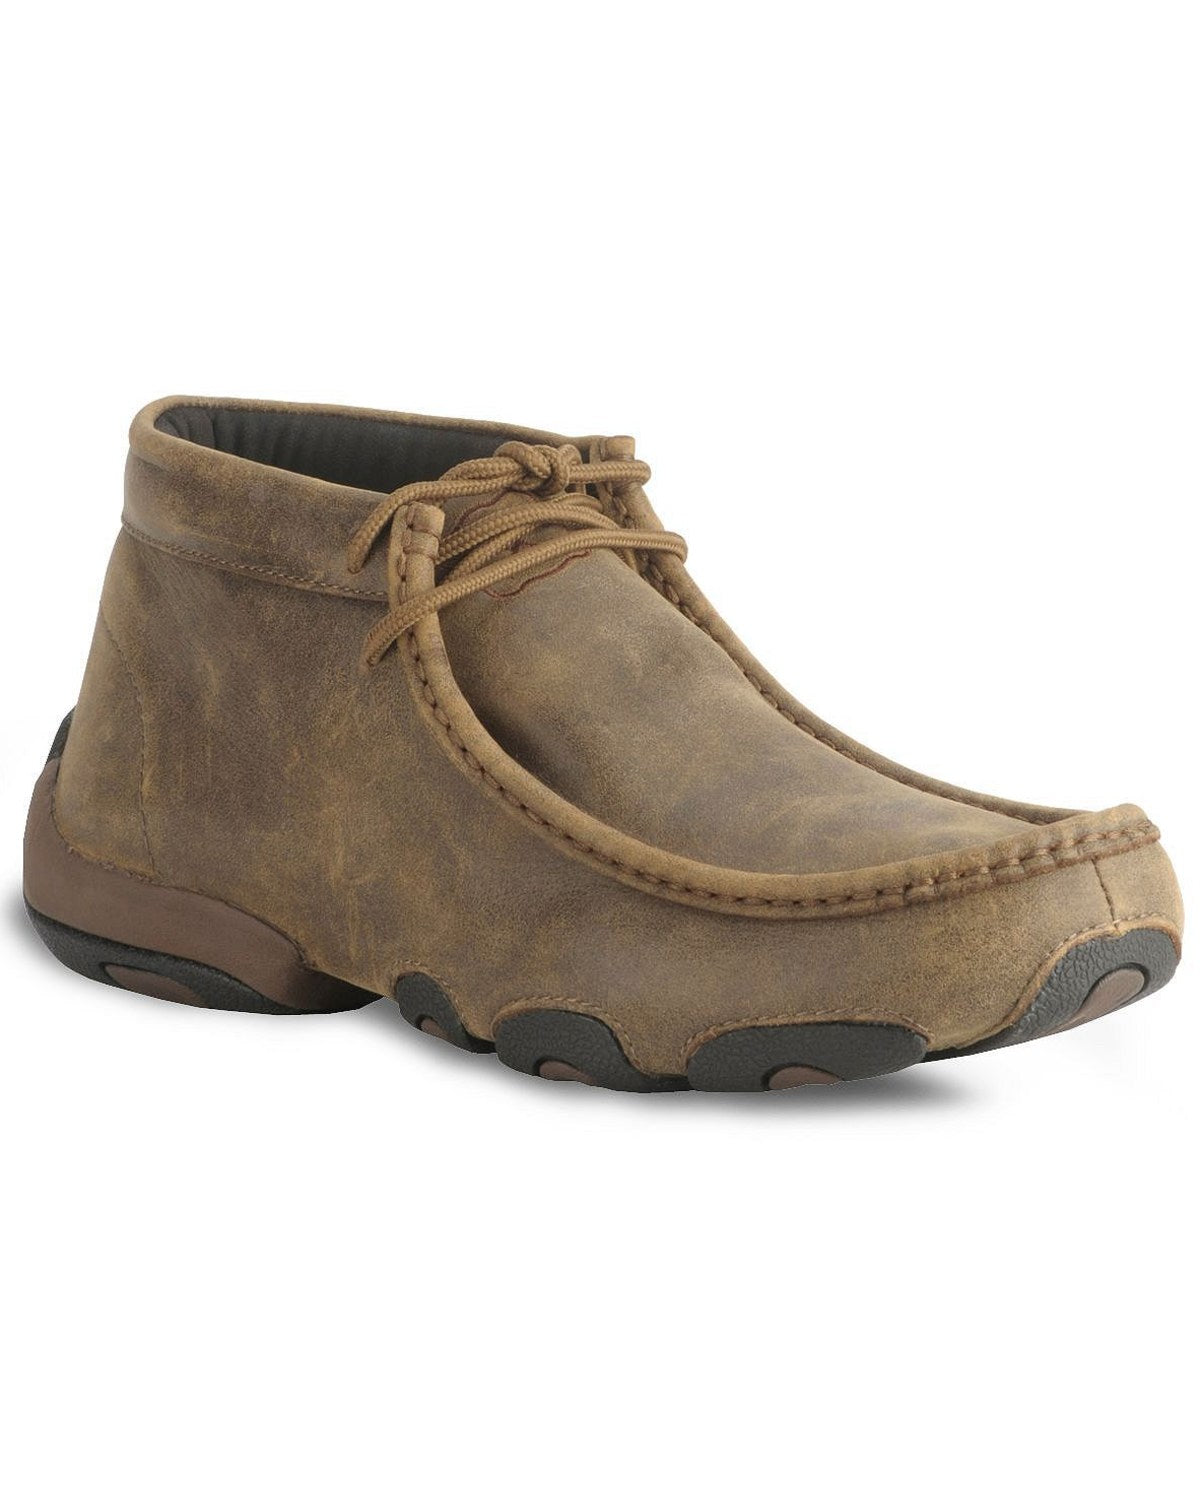 TWISTED X WOMENS BOMBER DRIVING MOCS (BROWN)